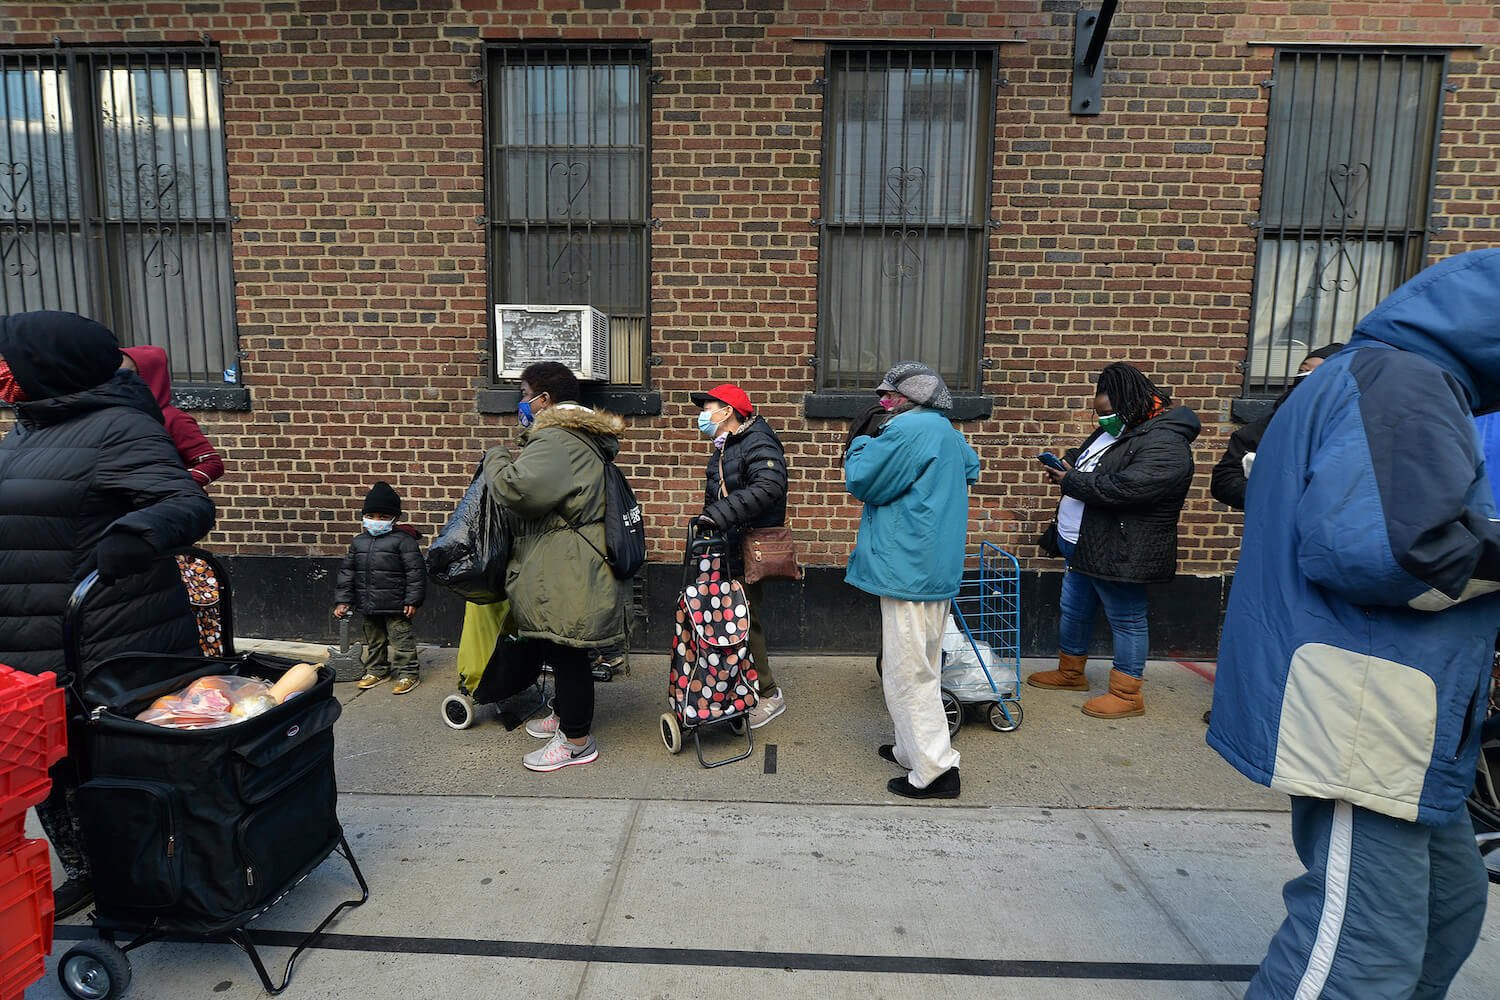 People stand in line outside the Common Pantry as they wait for NY Gov. Andrew Cuomo to distribute Thanksgiving turkeys, in New York, NY, November 24, 2020.